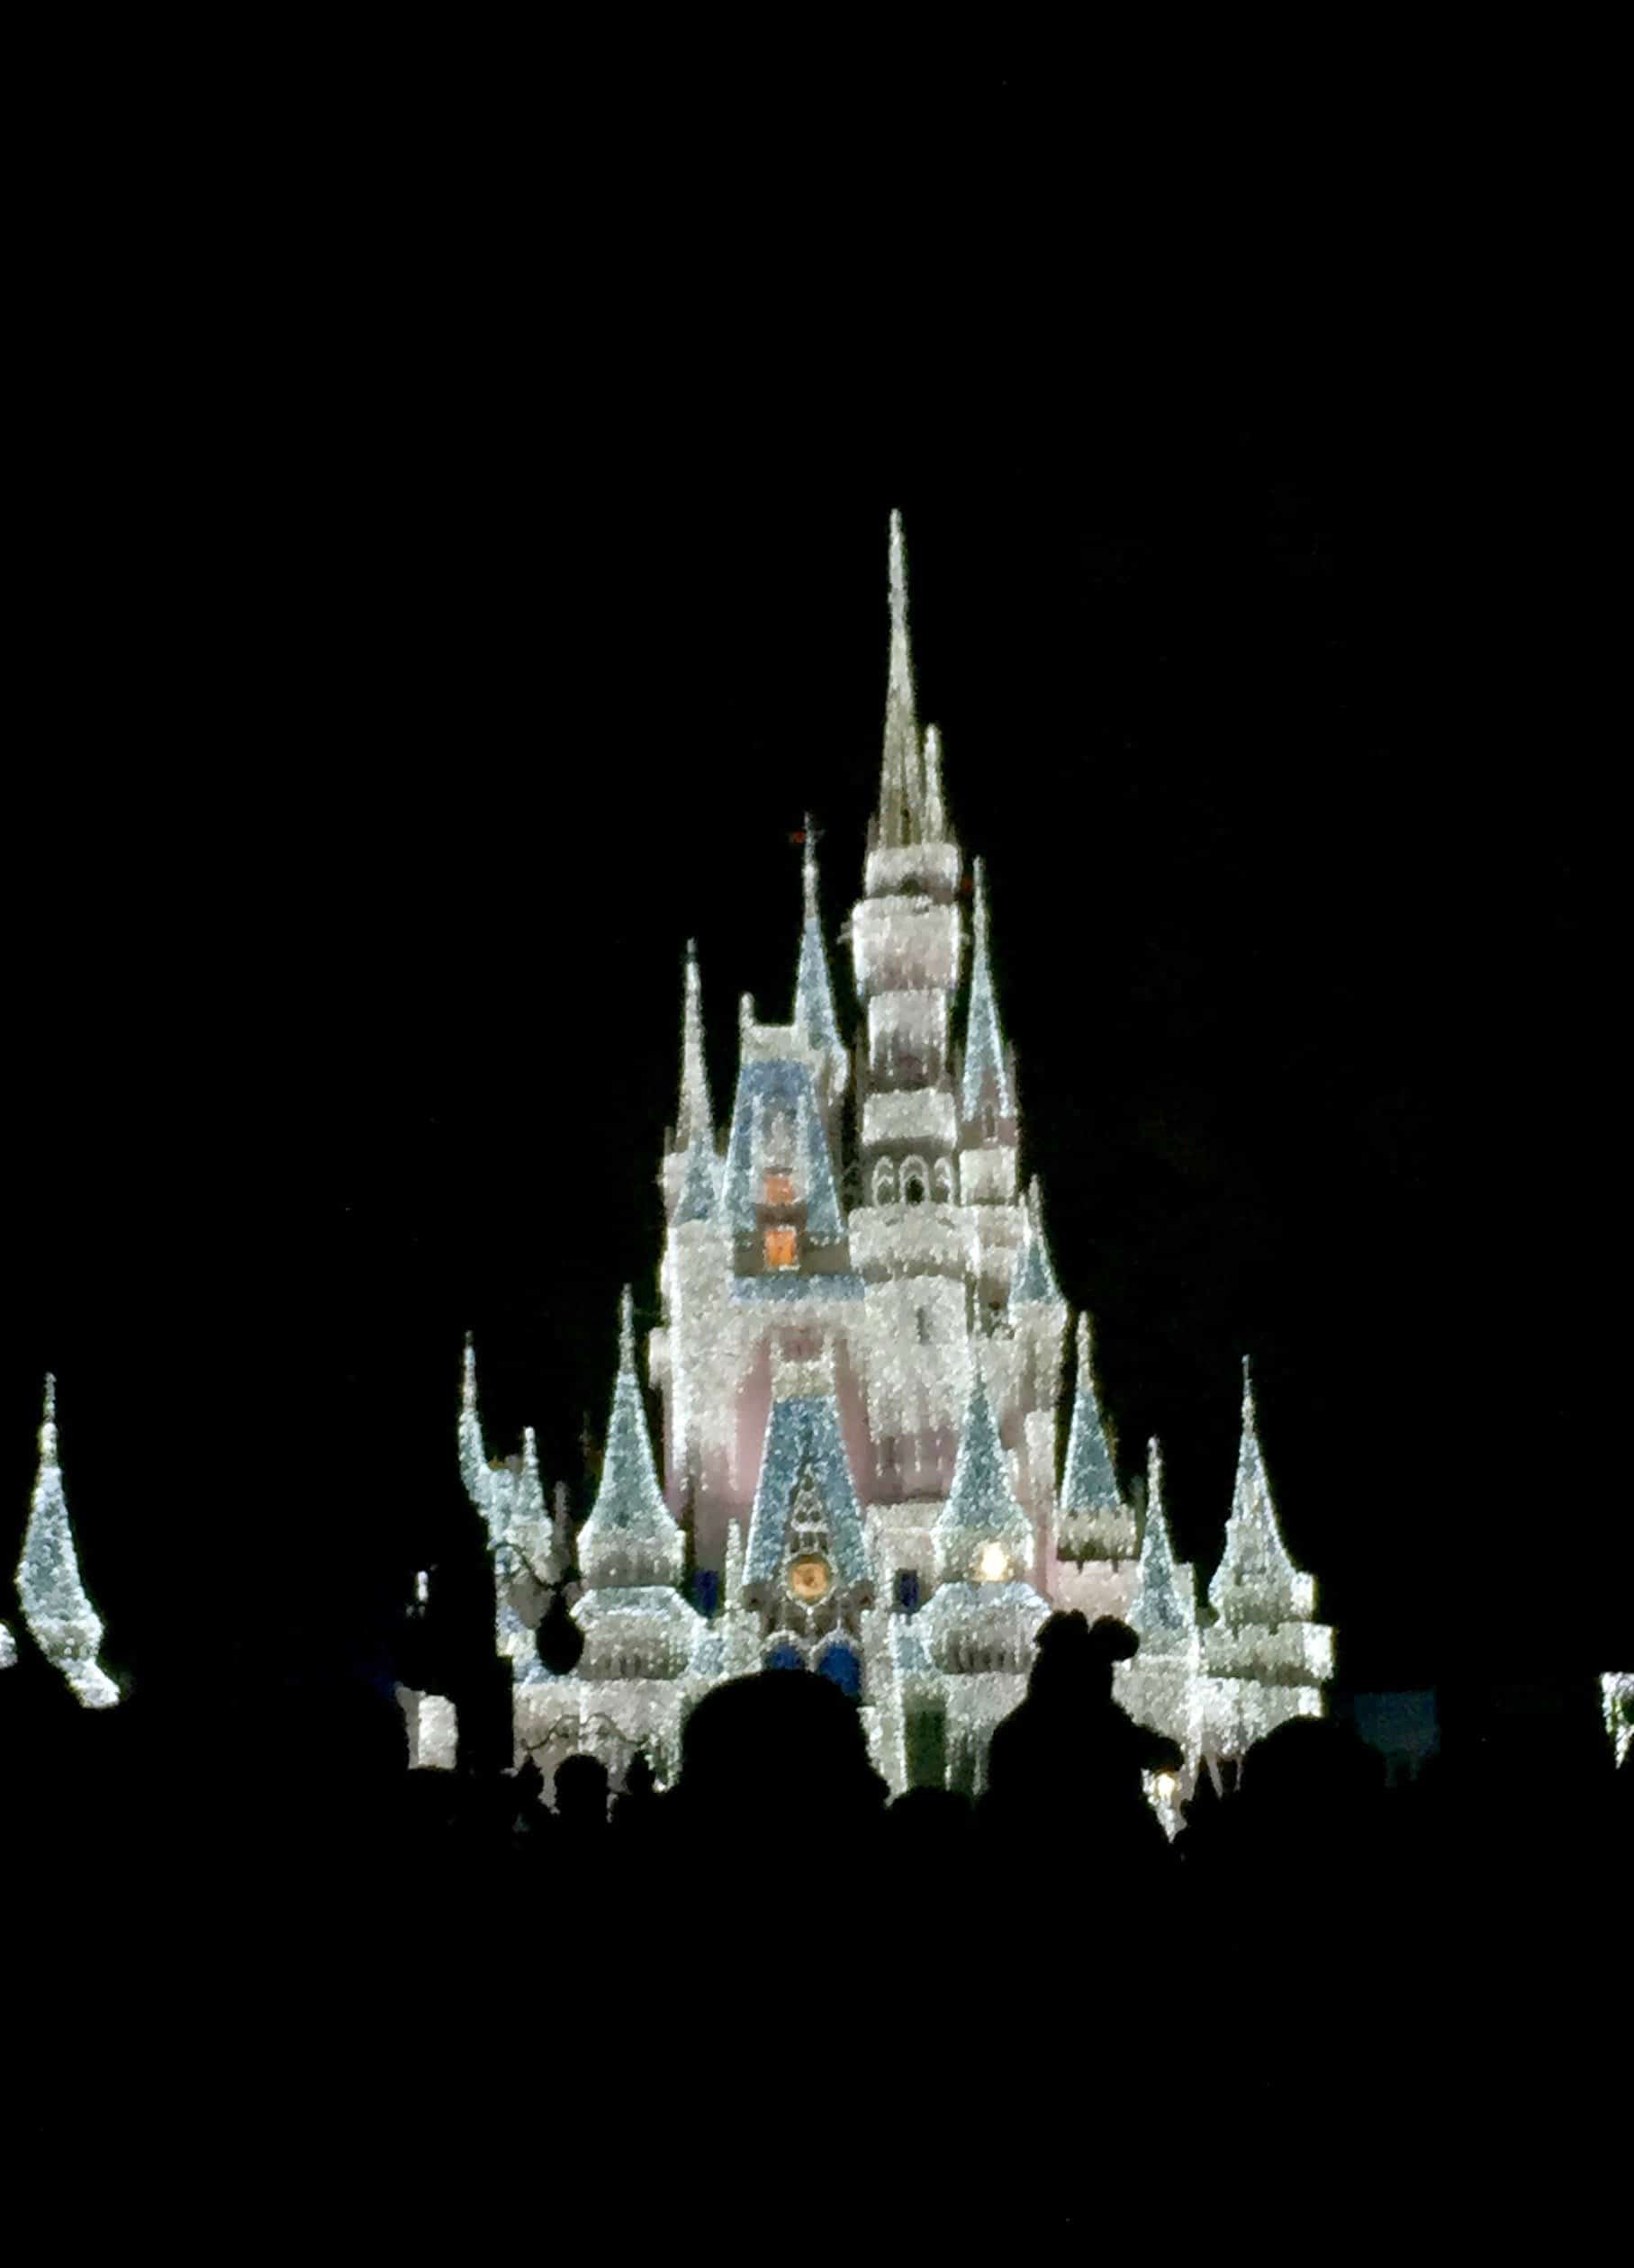 Cinderella's castle transformed by thousands of white lights